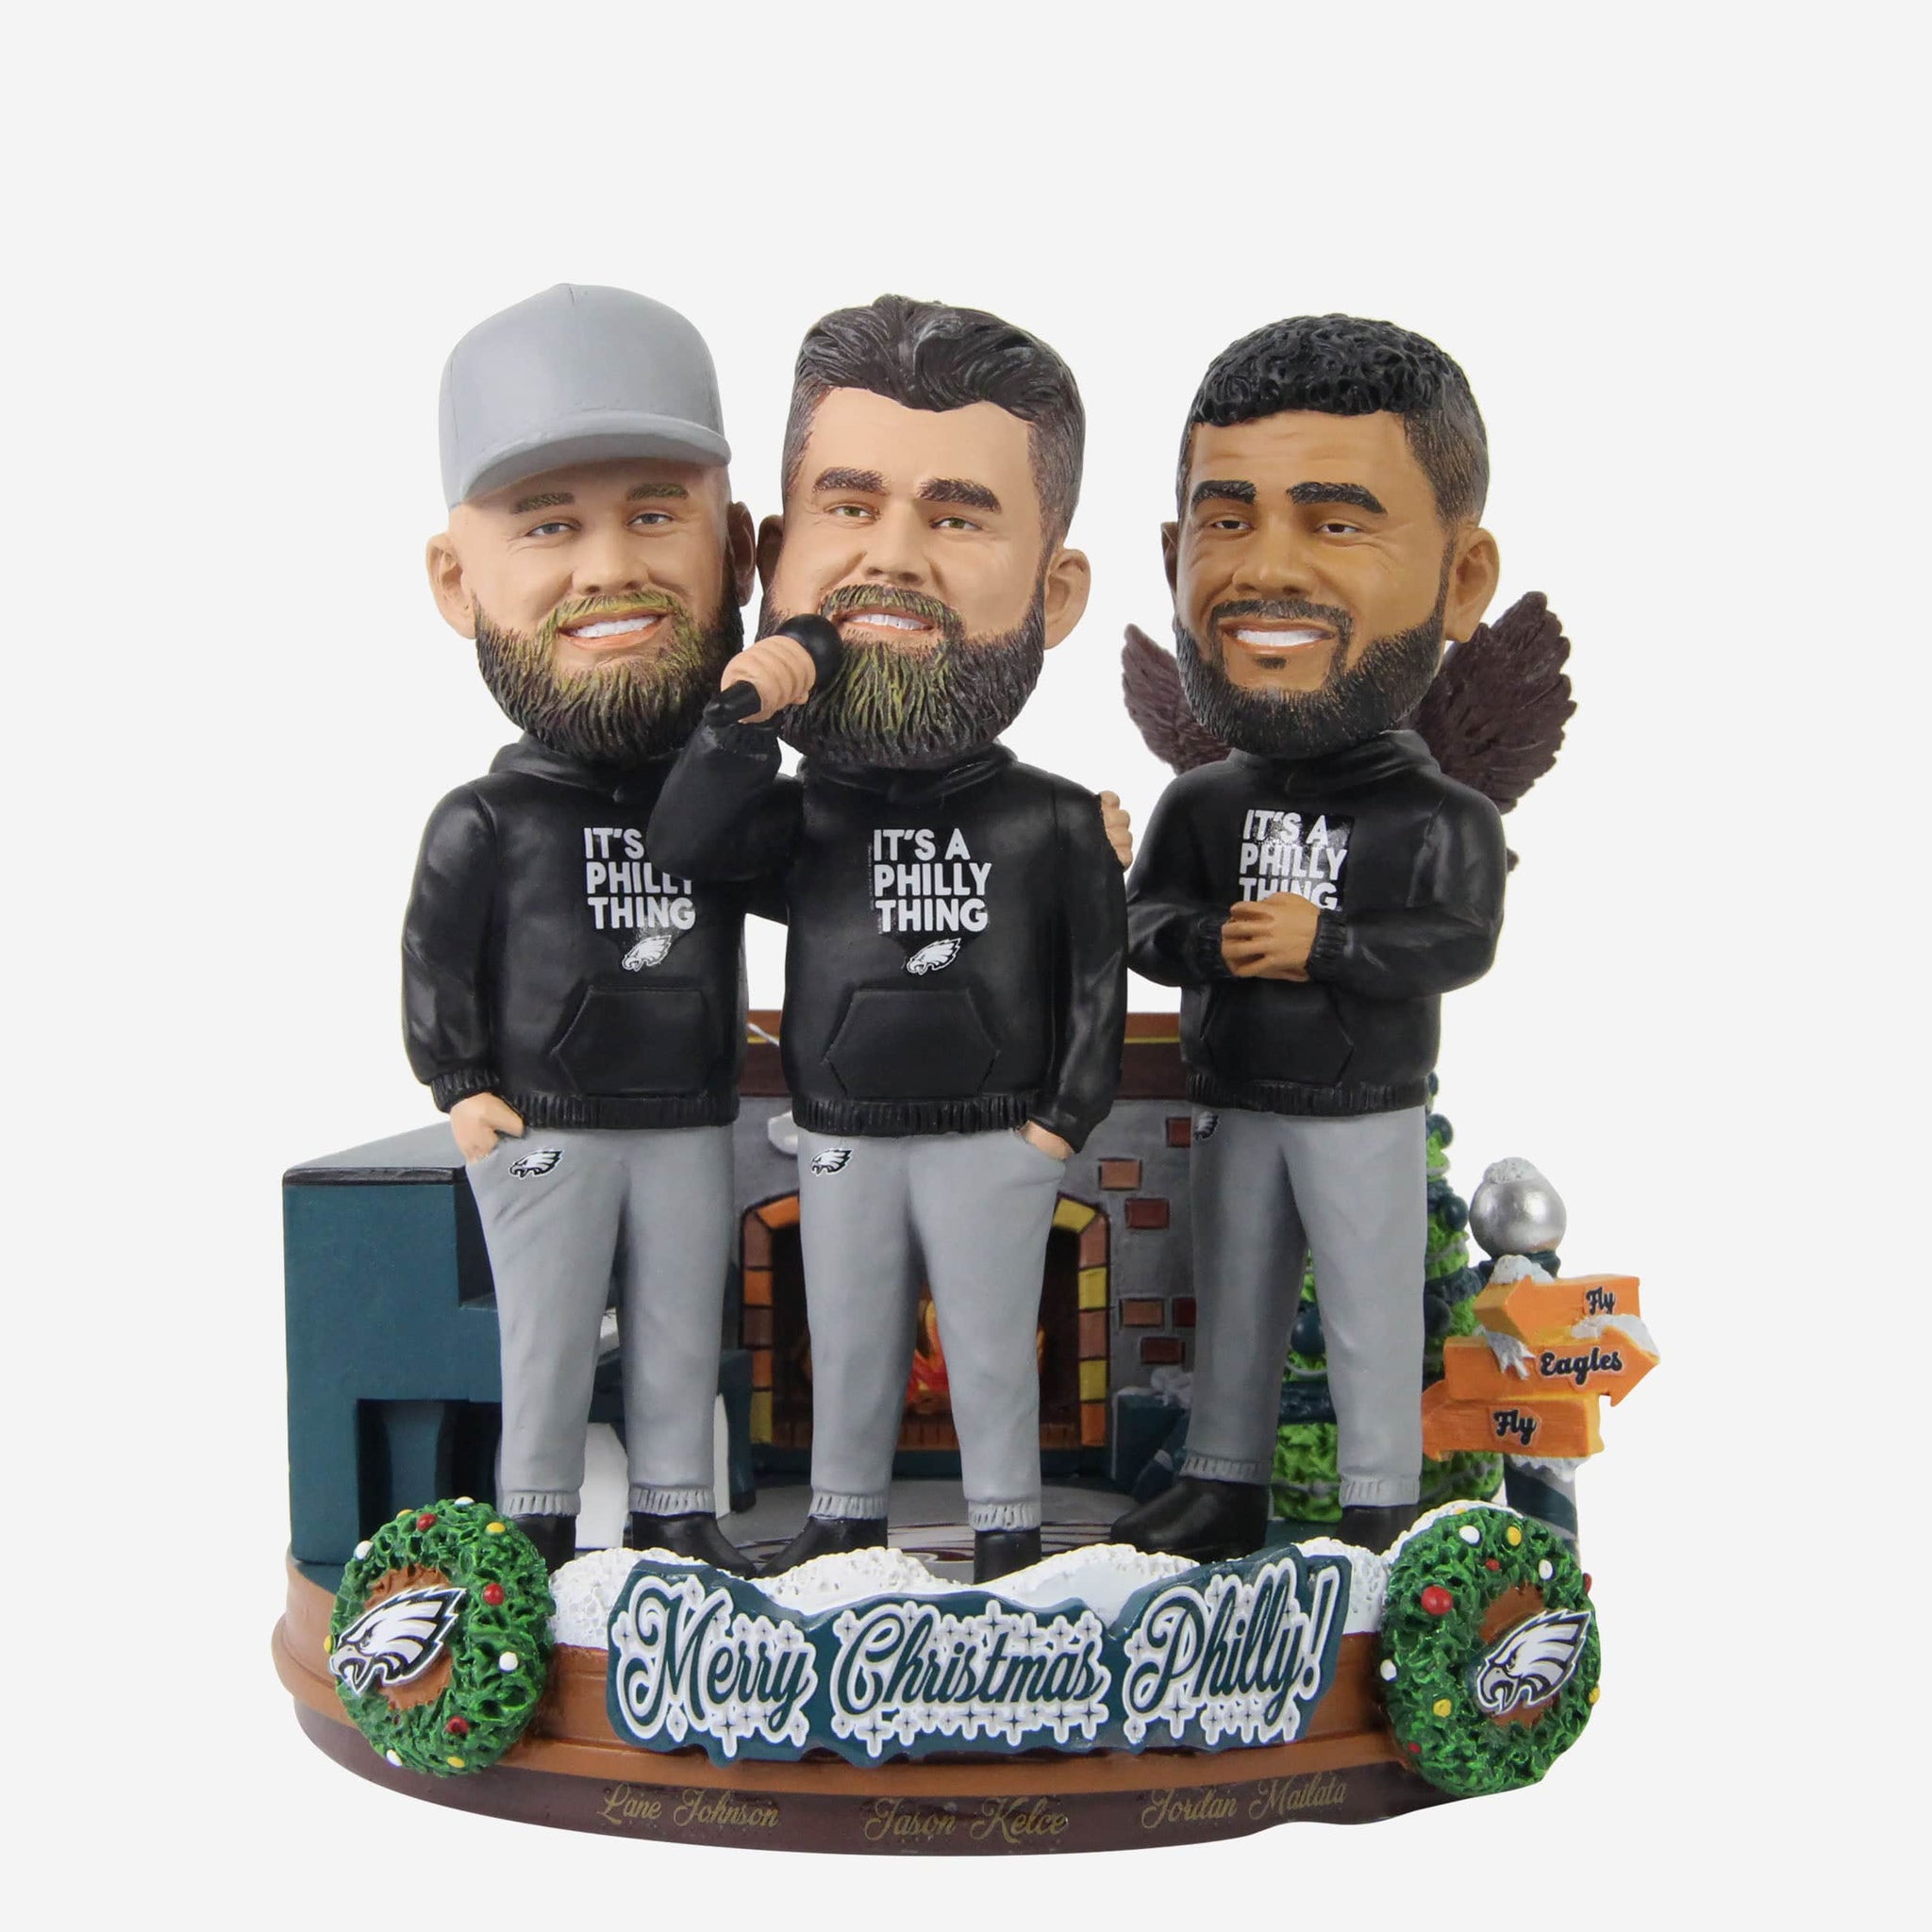 Kelce brothers bobblehead to apparel and more: Cleveland Cavaliers